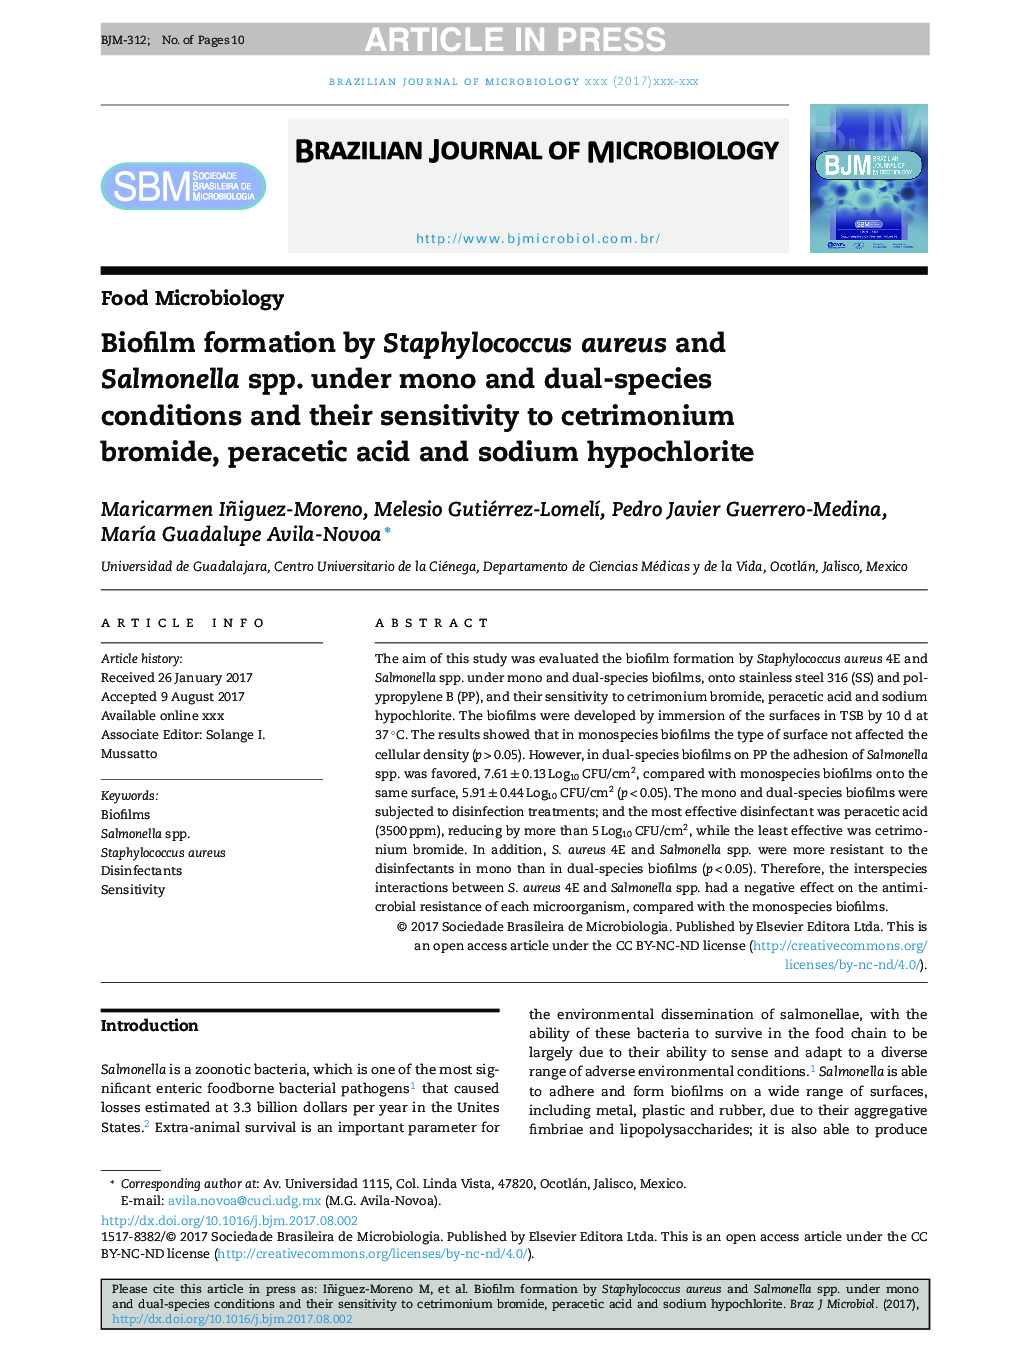 Biofilm formation by Staphylococcus aureus and Salmonella spp. under mono and dual-species conditions and their sensitivity to cetrimonium bromide, peracetic acid and sodium hypochlorite